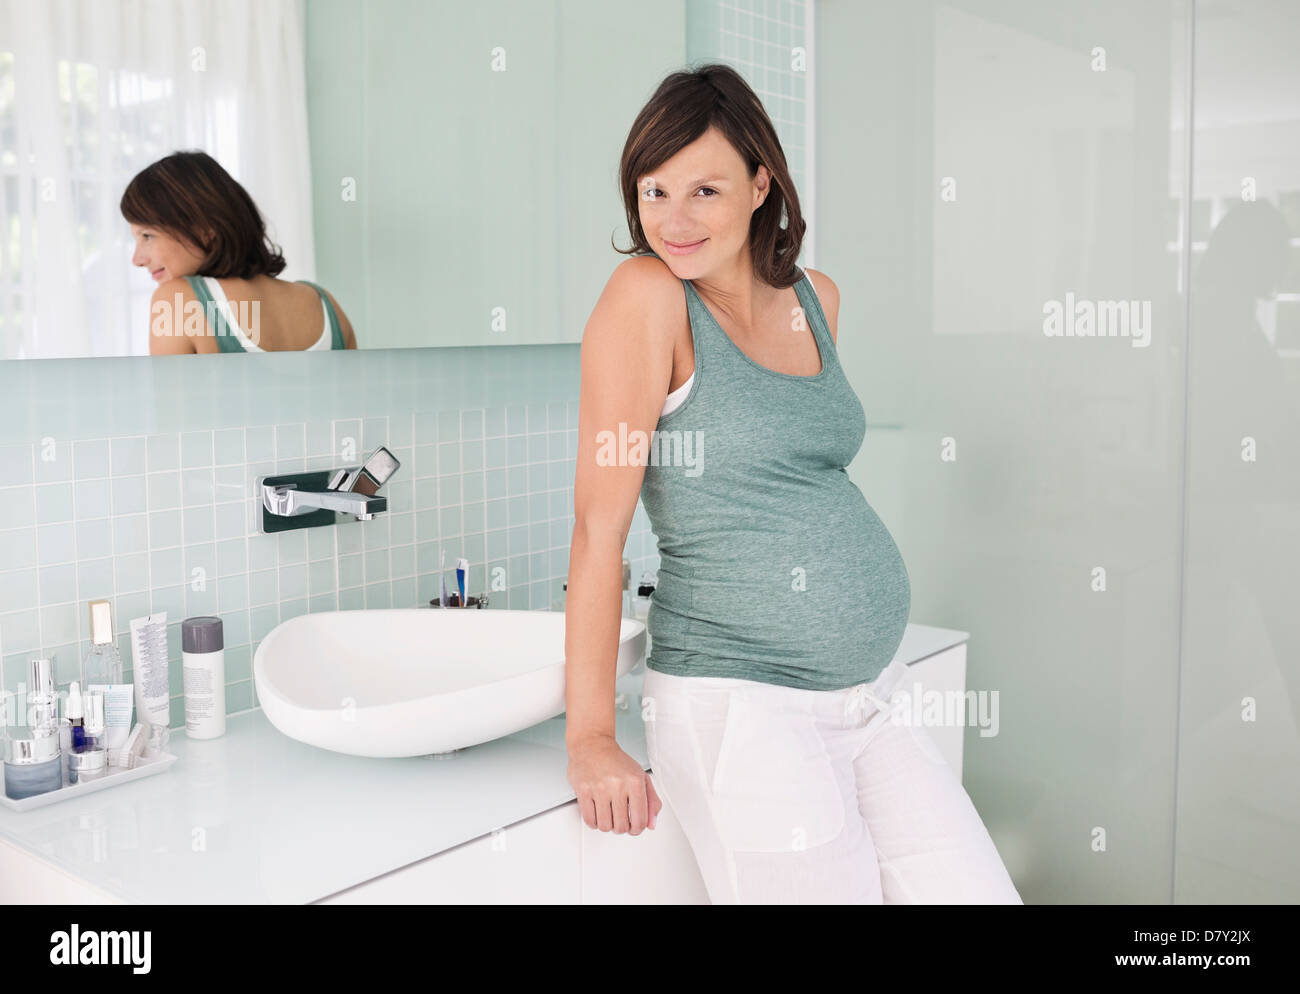 Pregnant woman leaning on bathroom sink Stock Photo